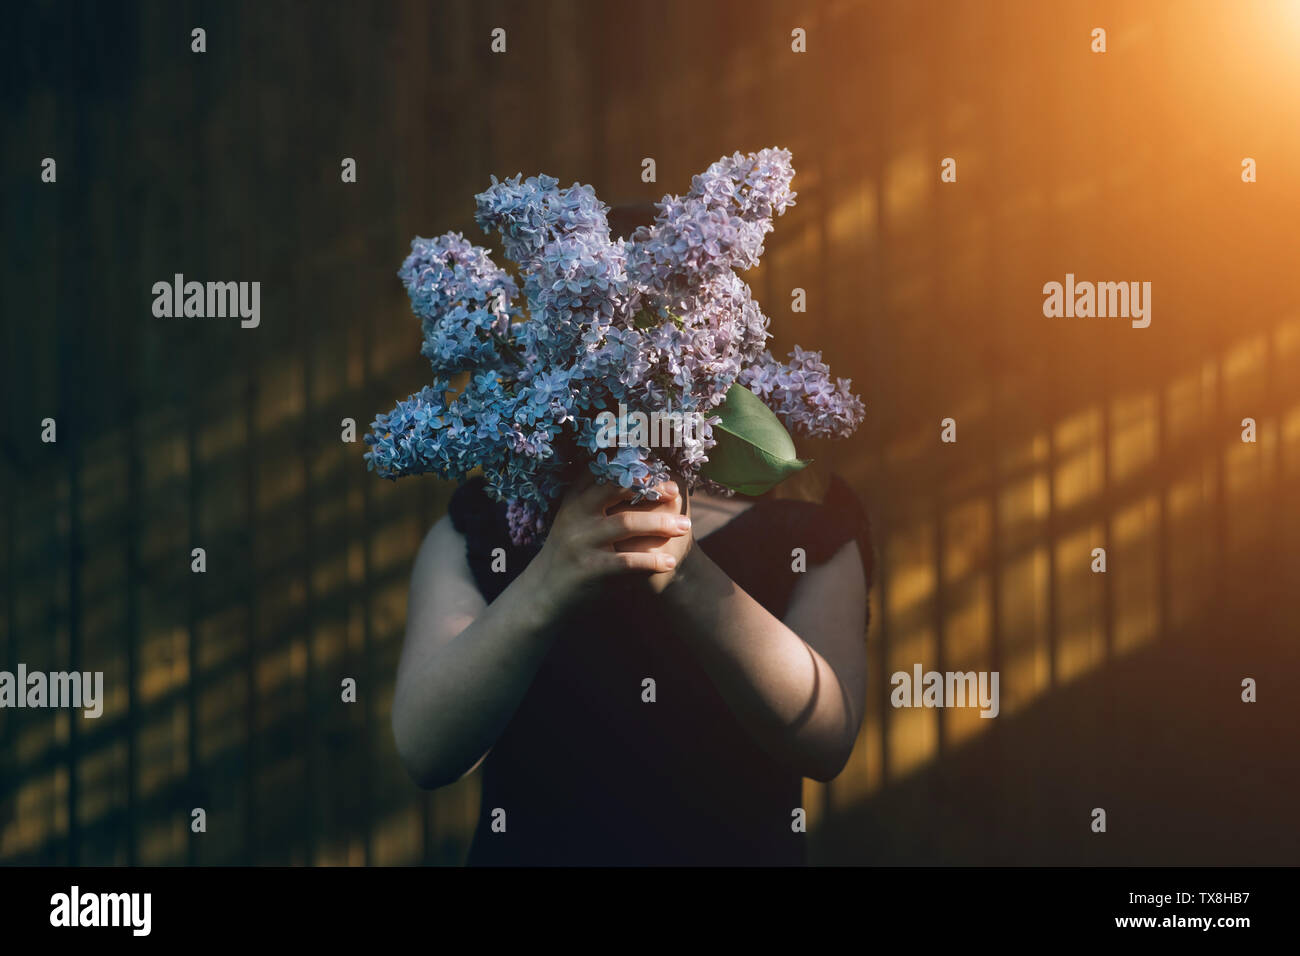 Girl holding lilac bouquet in front of face. Child enjoying flowers outdoors in front of wall. Kid hiding behind bunch of violet flowers. Summer and spring flora. Young person with gift in hands Stock Photo